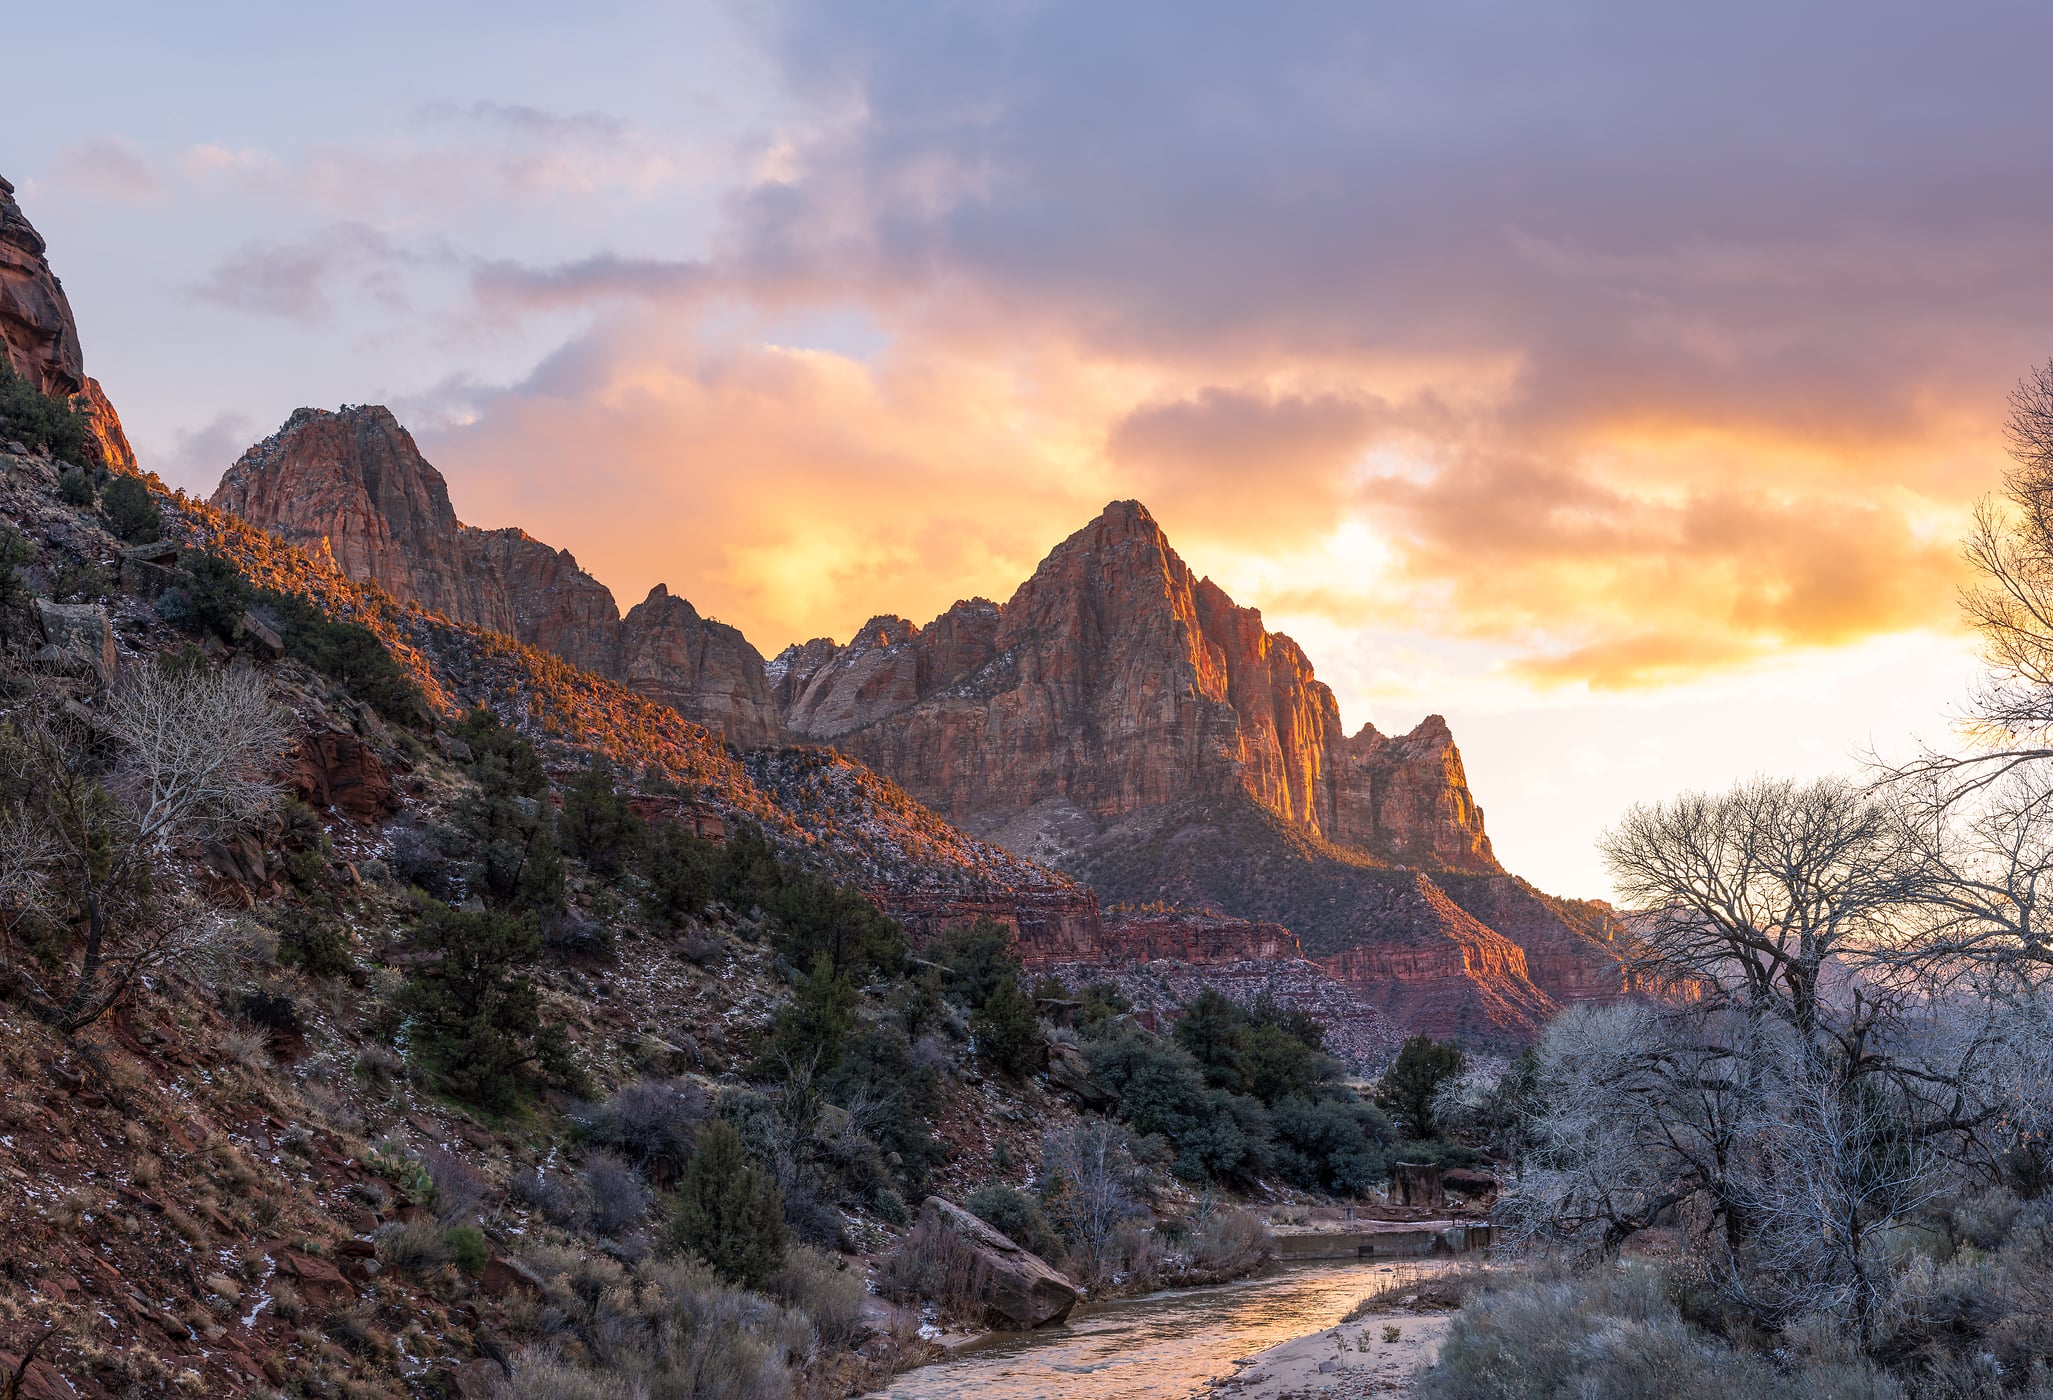 375 megapixels! A very high resolution, large-format VAST photo print of The Watchman mountain and the Virgin River at sunset; landscape photograph created by Chris Blake in Zion National Park, Utah.